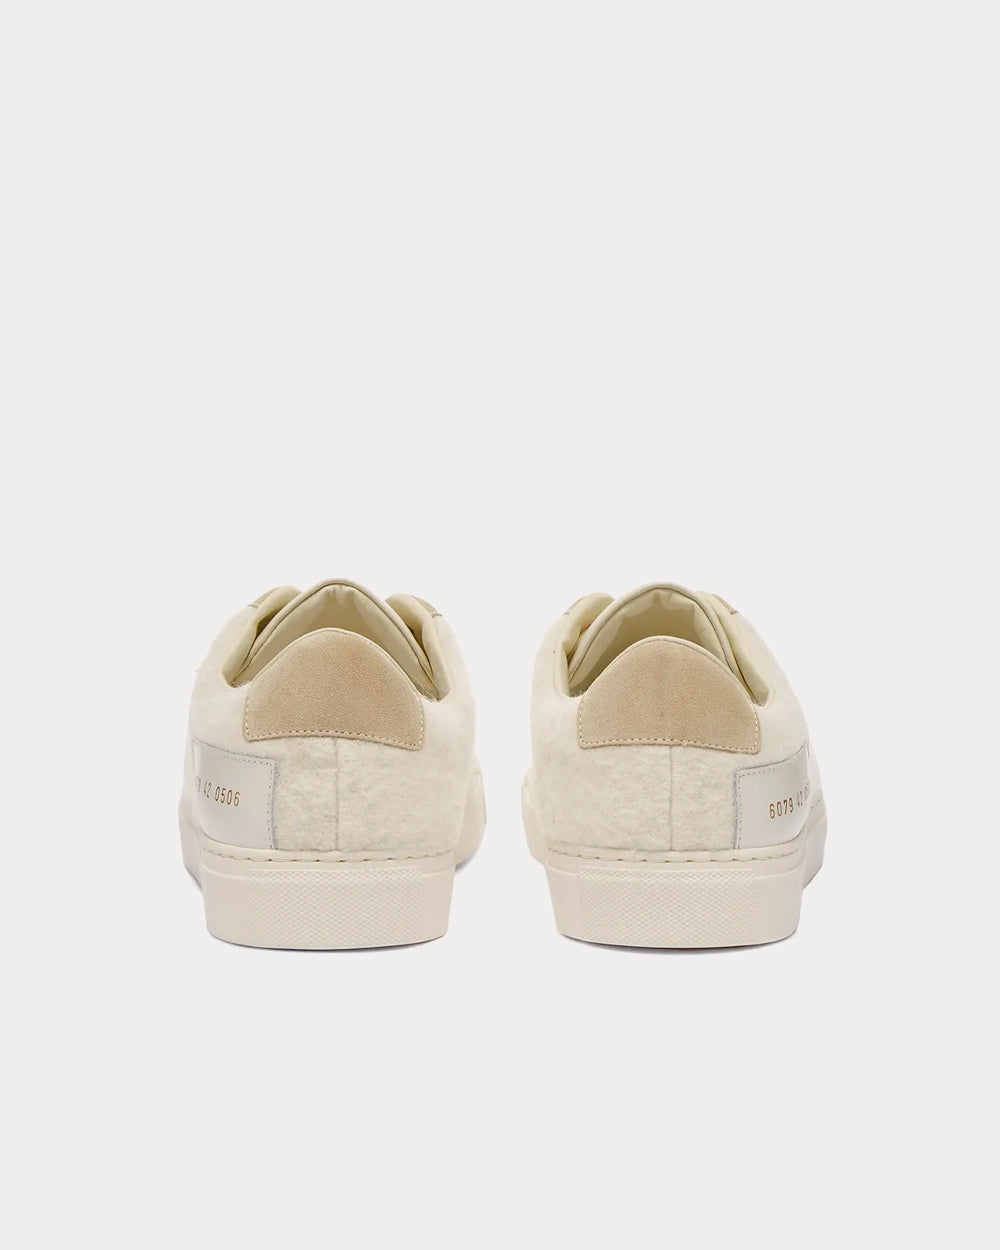 Common Projects - Retro Wool White Low Top Sneakers